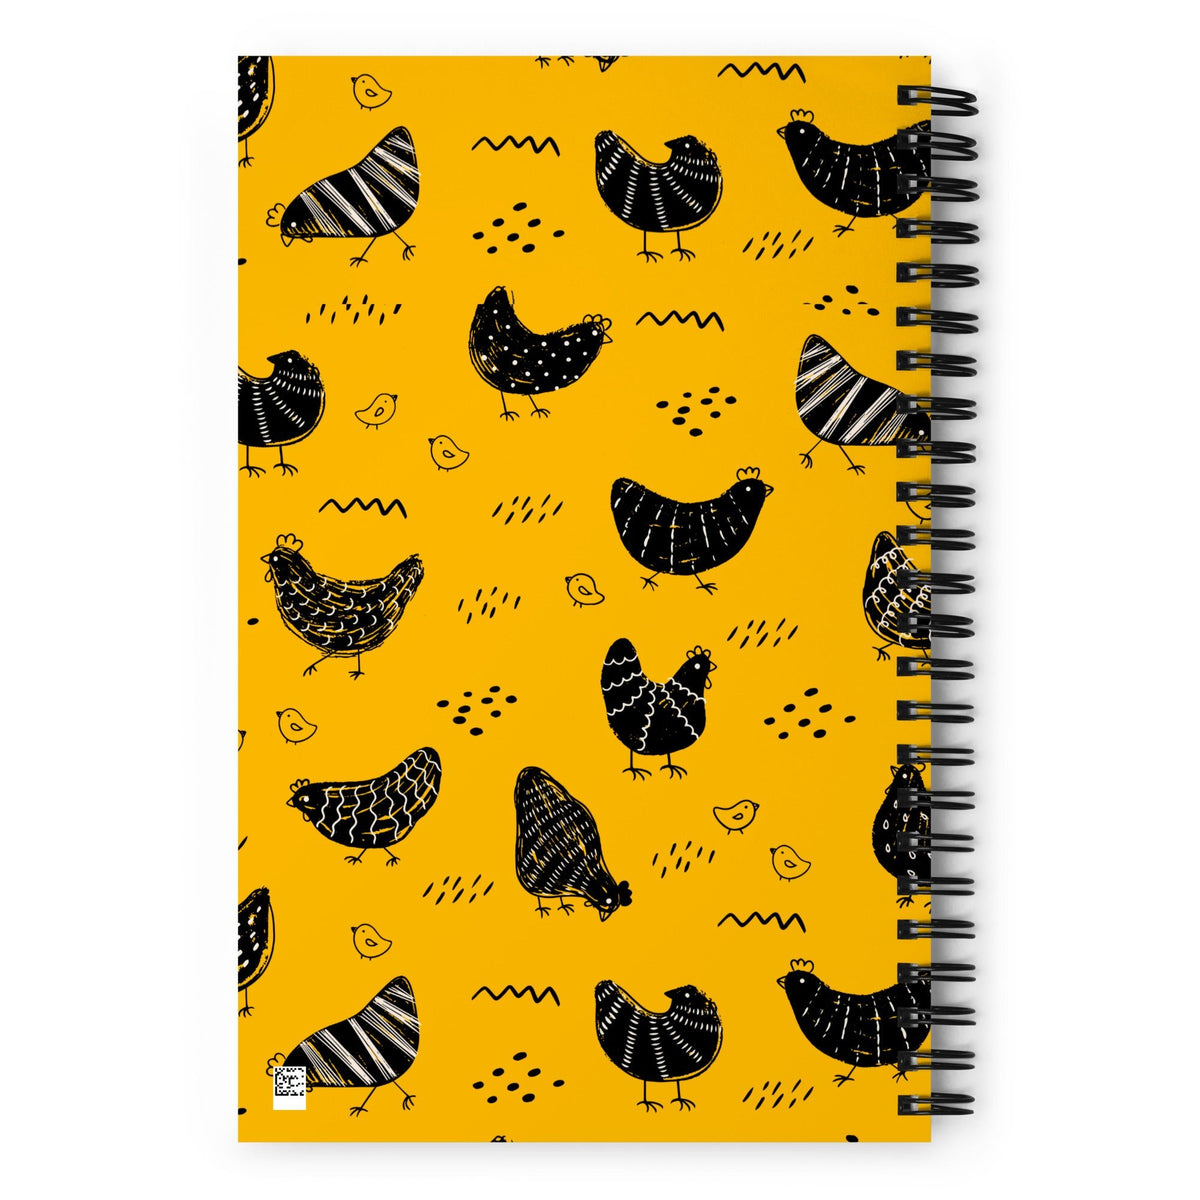 Vintage Yellow Chicken Spiral Notebook - Cluck It All Farms